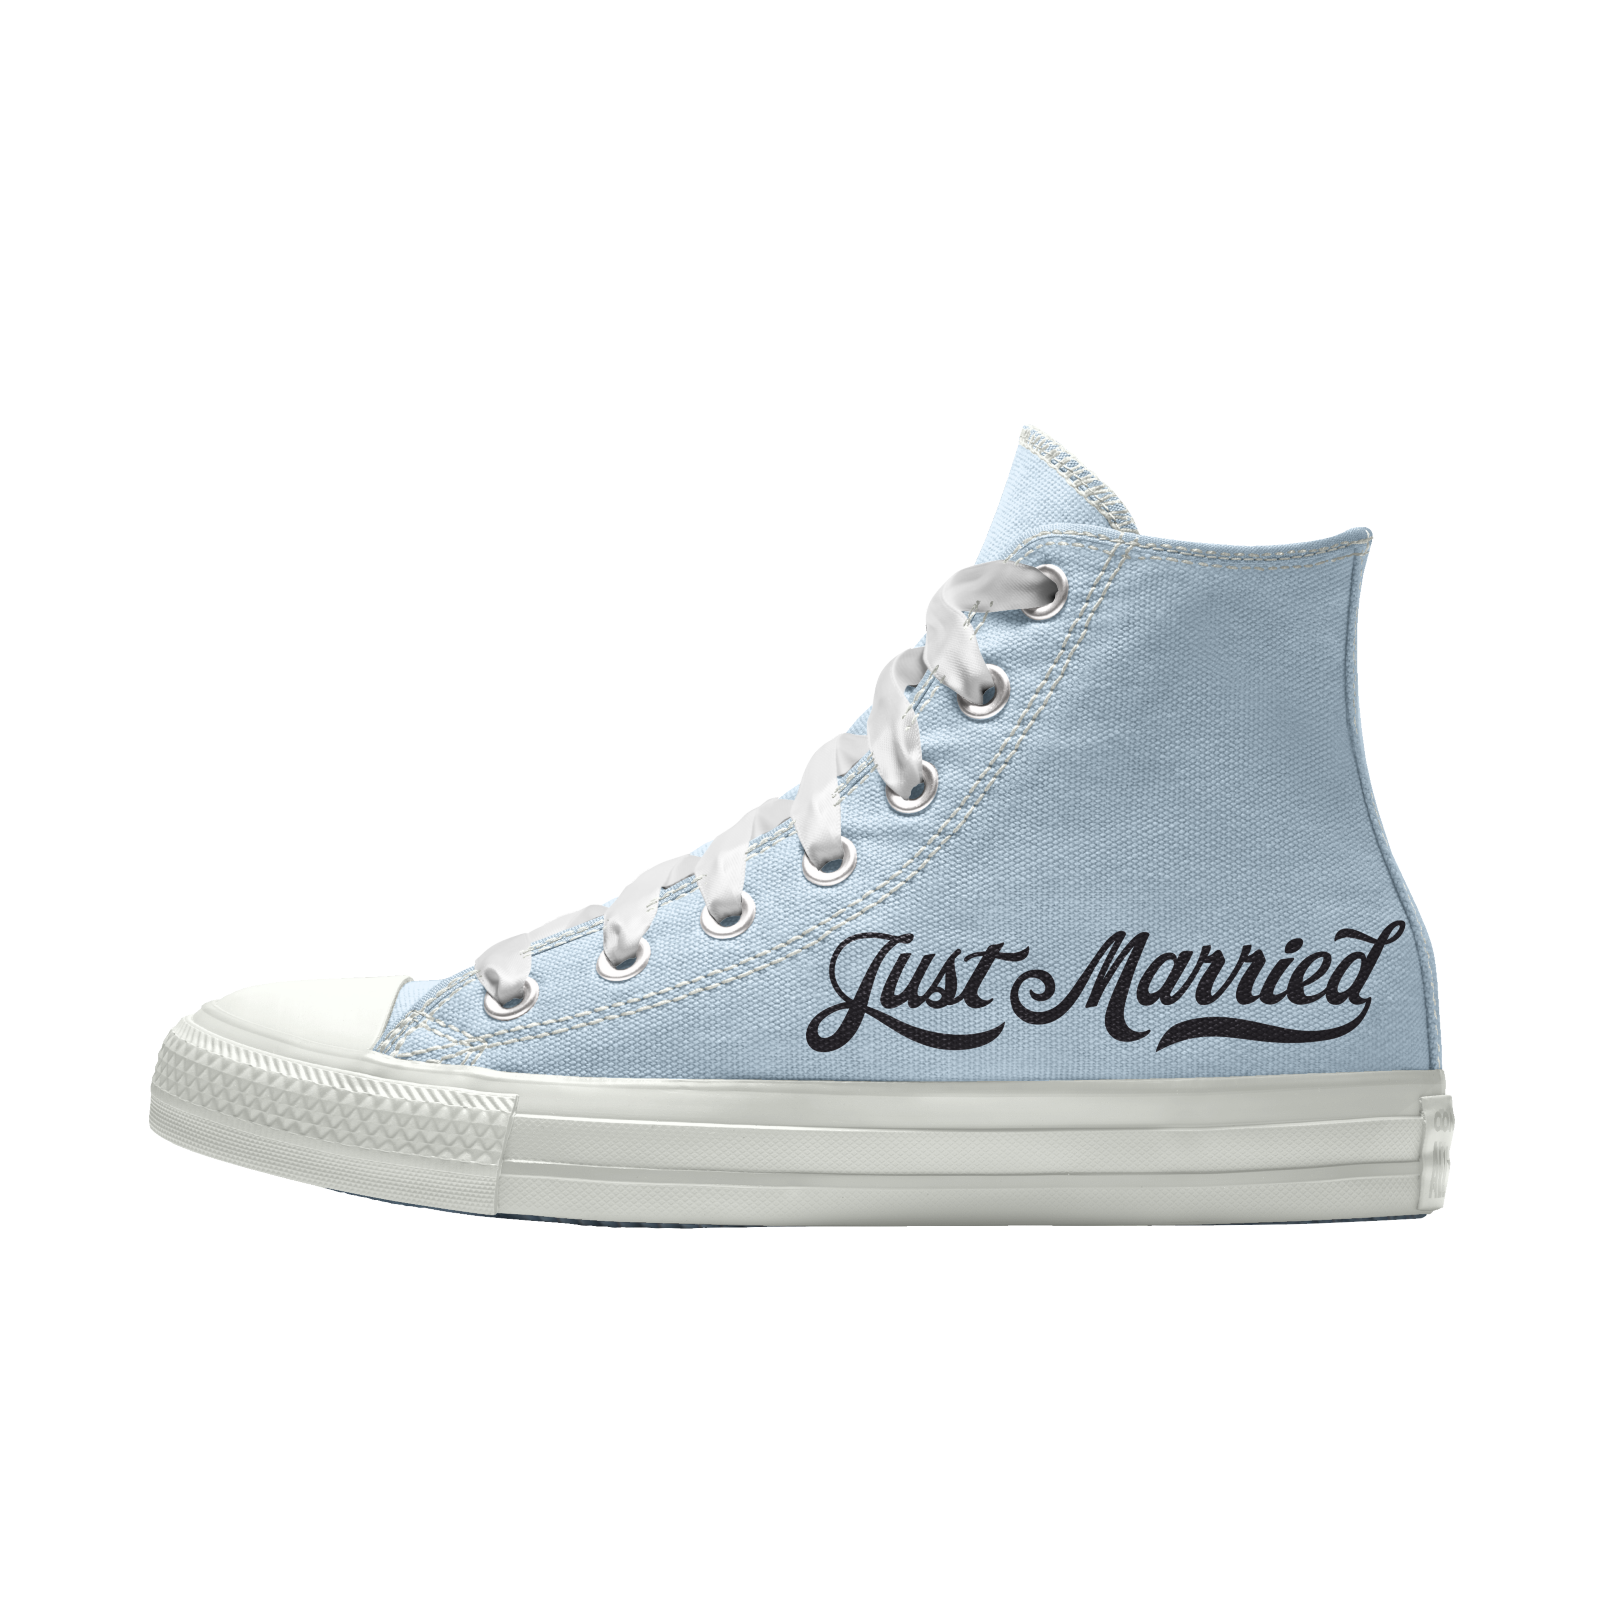 Just Married blue converse sneakers